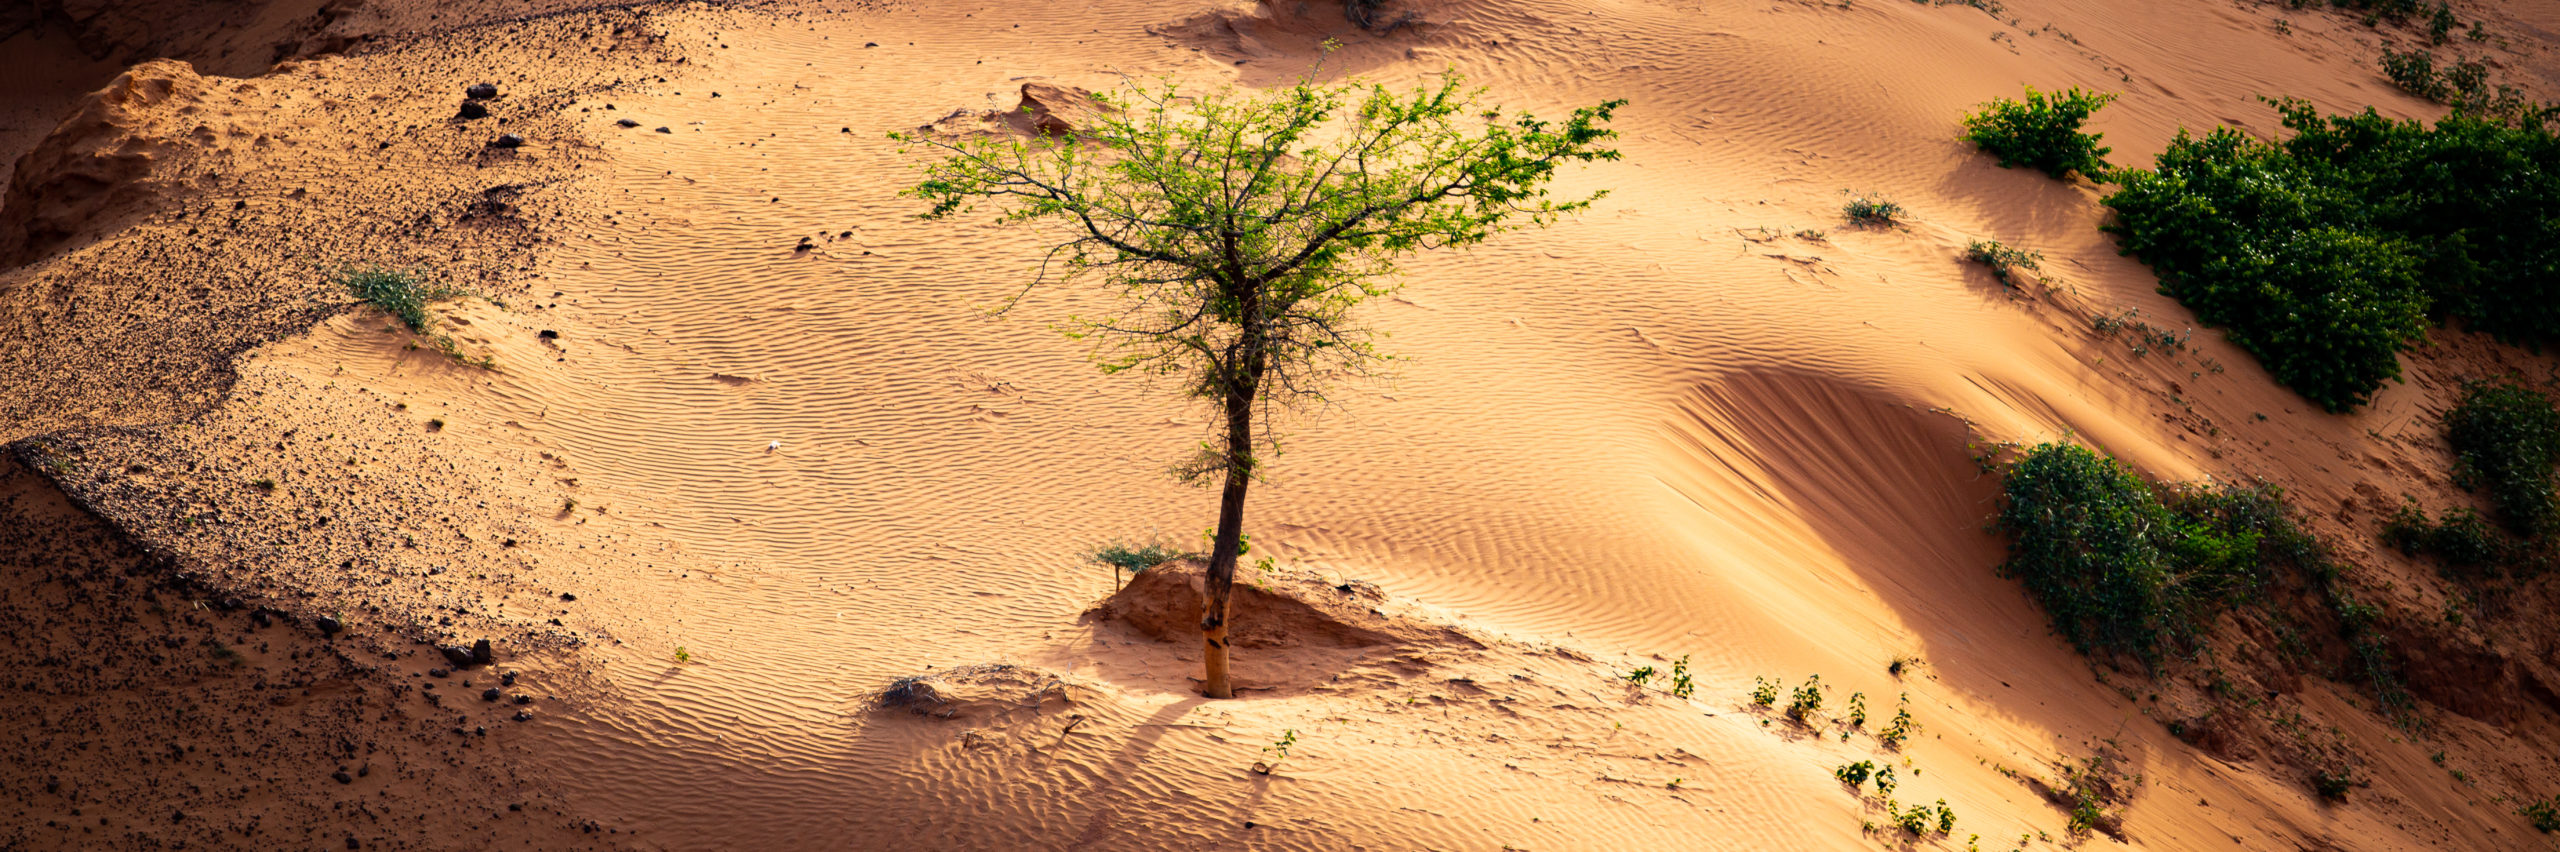 Sun shining a spotlight over resilient tree growing in a little sand dune in a shadowy ravine on a sahelian plateau with refresehd vegetation during summer rainy season outside Niamey capital of Niger